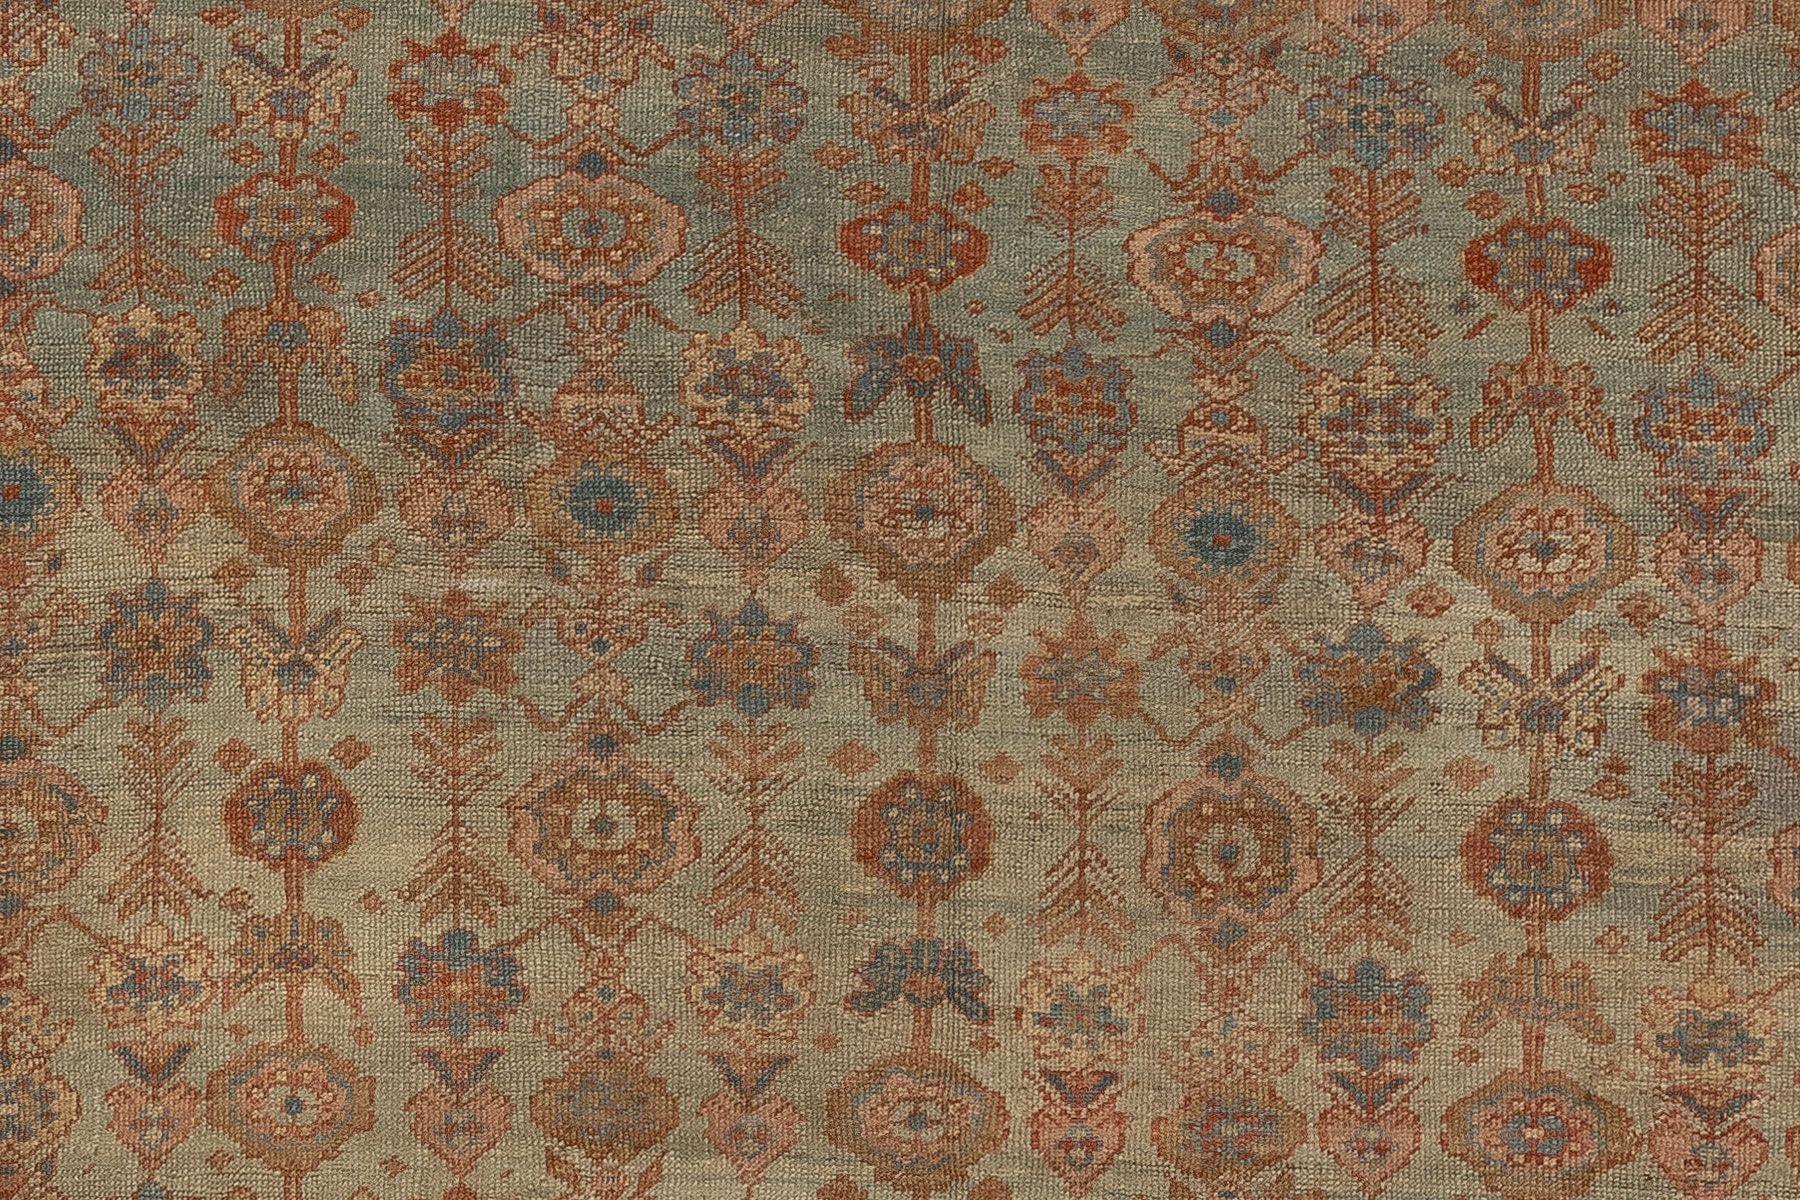 Rare large square size Persian antique Persian Bakshaish with a light blue field, accents in pink, apricot, terracotta, and blue

Measures: 14'2